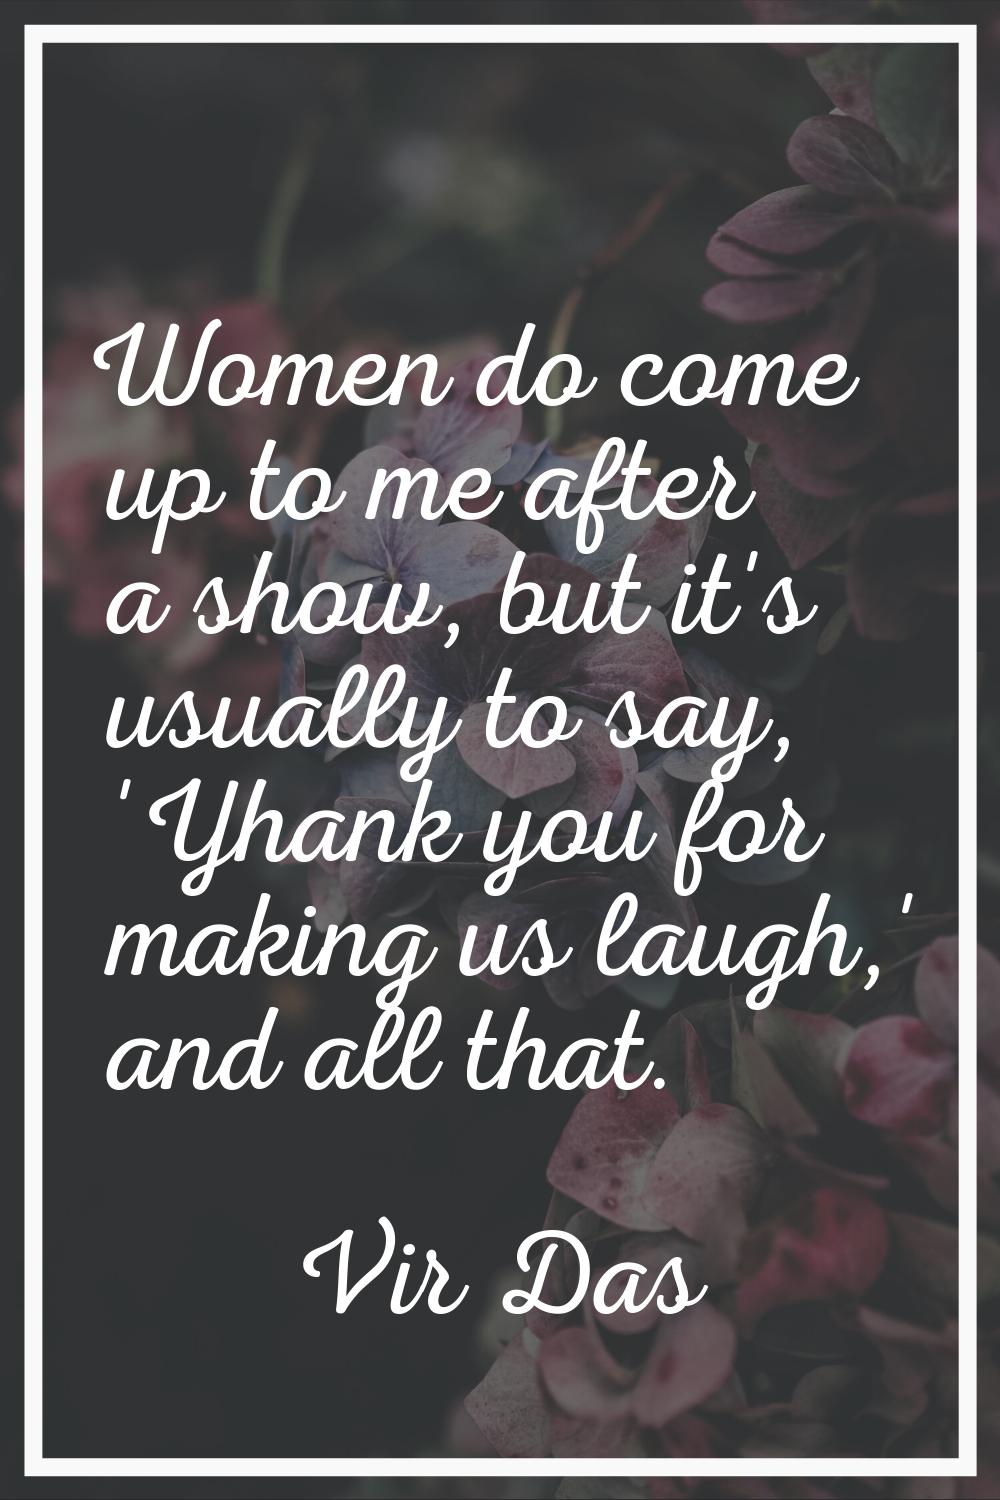 Women do come up to me after a show, but it's usually to say, 'Yhank you for making us laugh,' and 